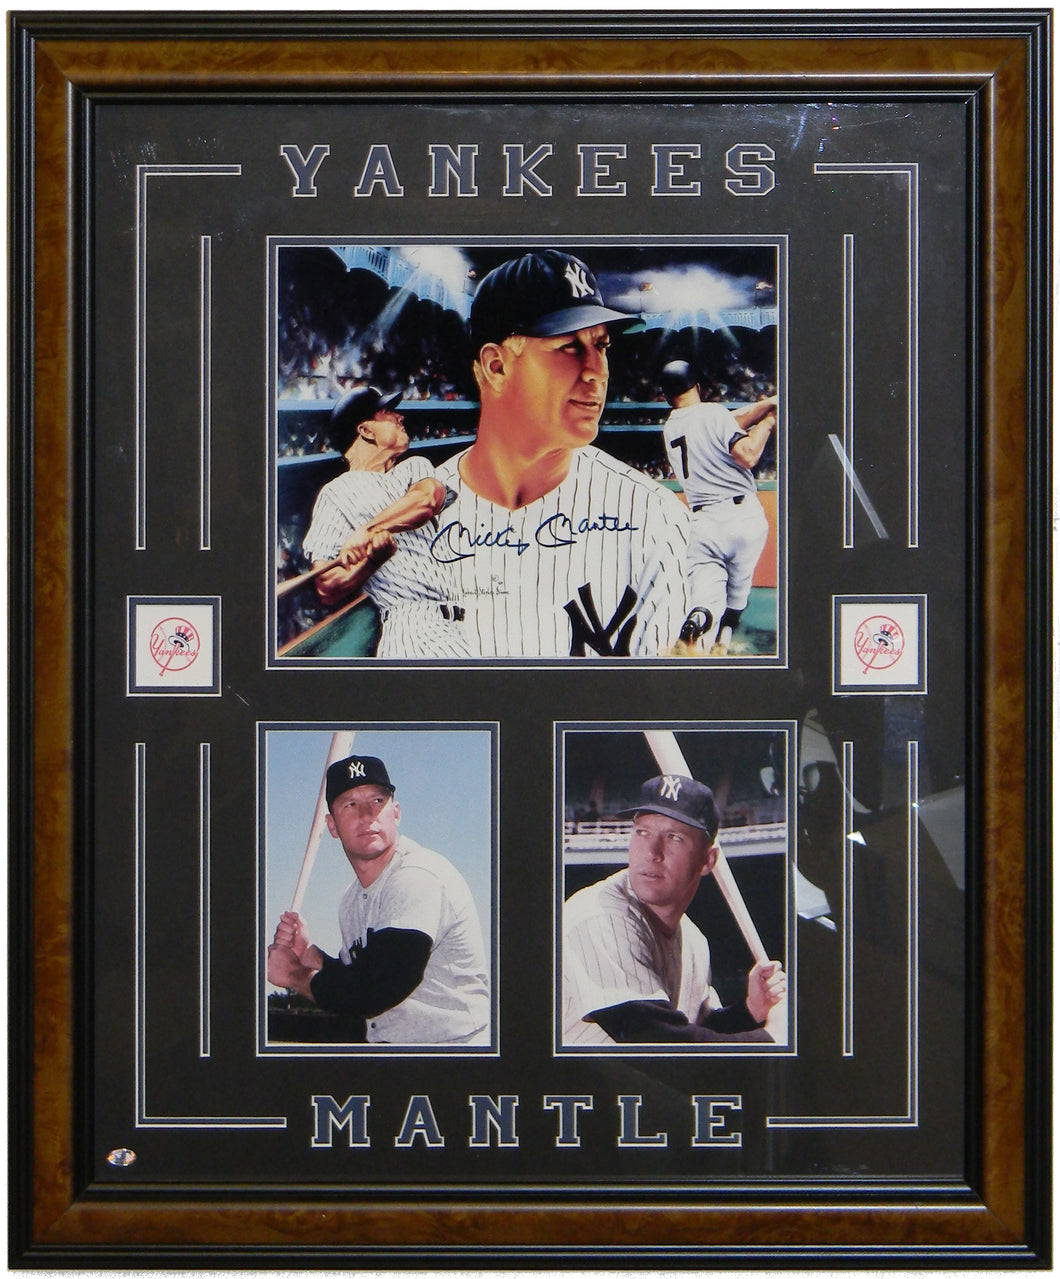 Mickey Mantle Signed Autographed 16x20 Lithograph Framed